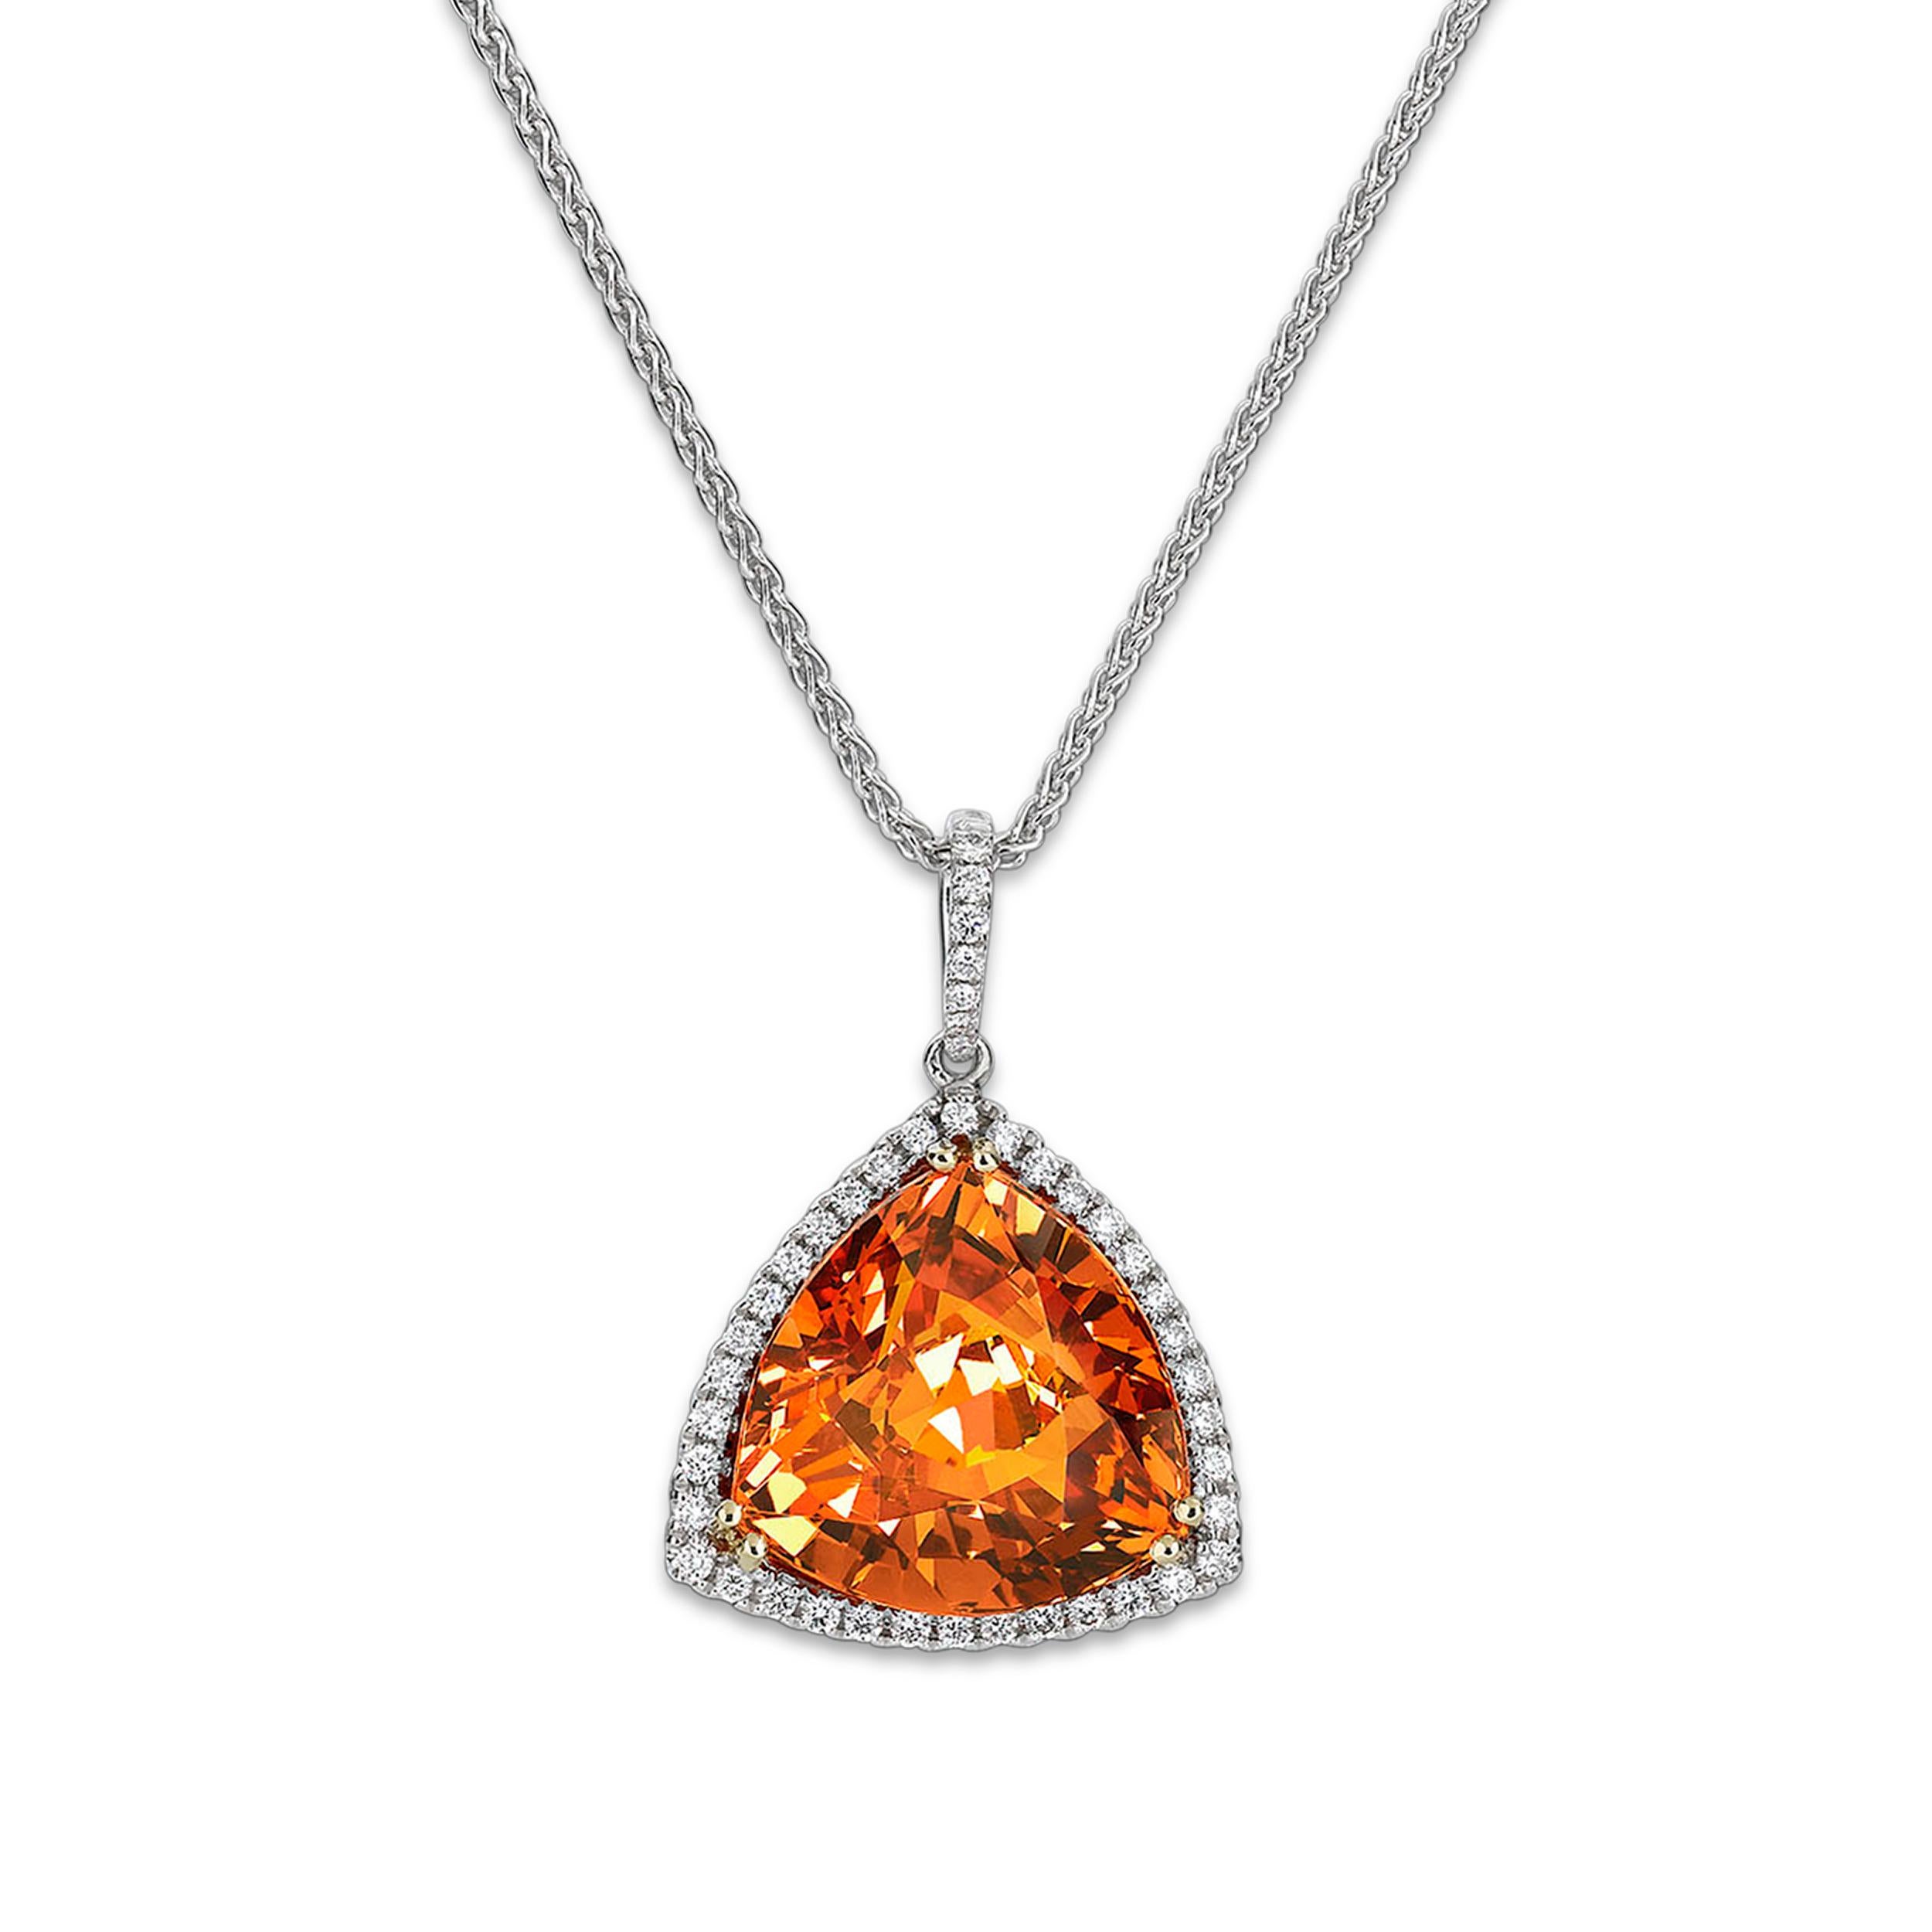 All the radiance of a fiery evening sky shines from this rare Mandarin garnet. Displaying a rich 